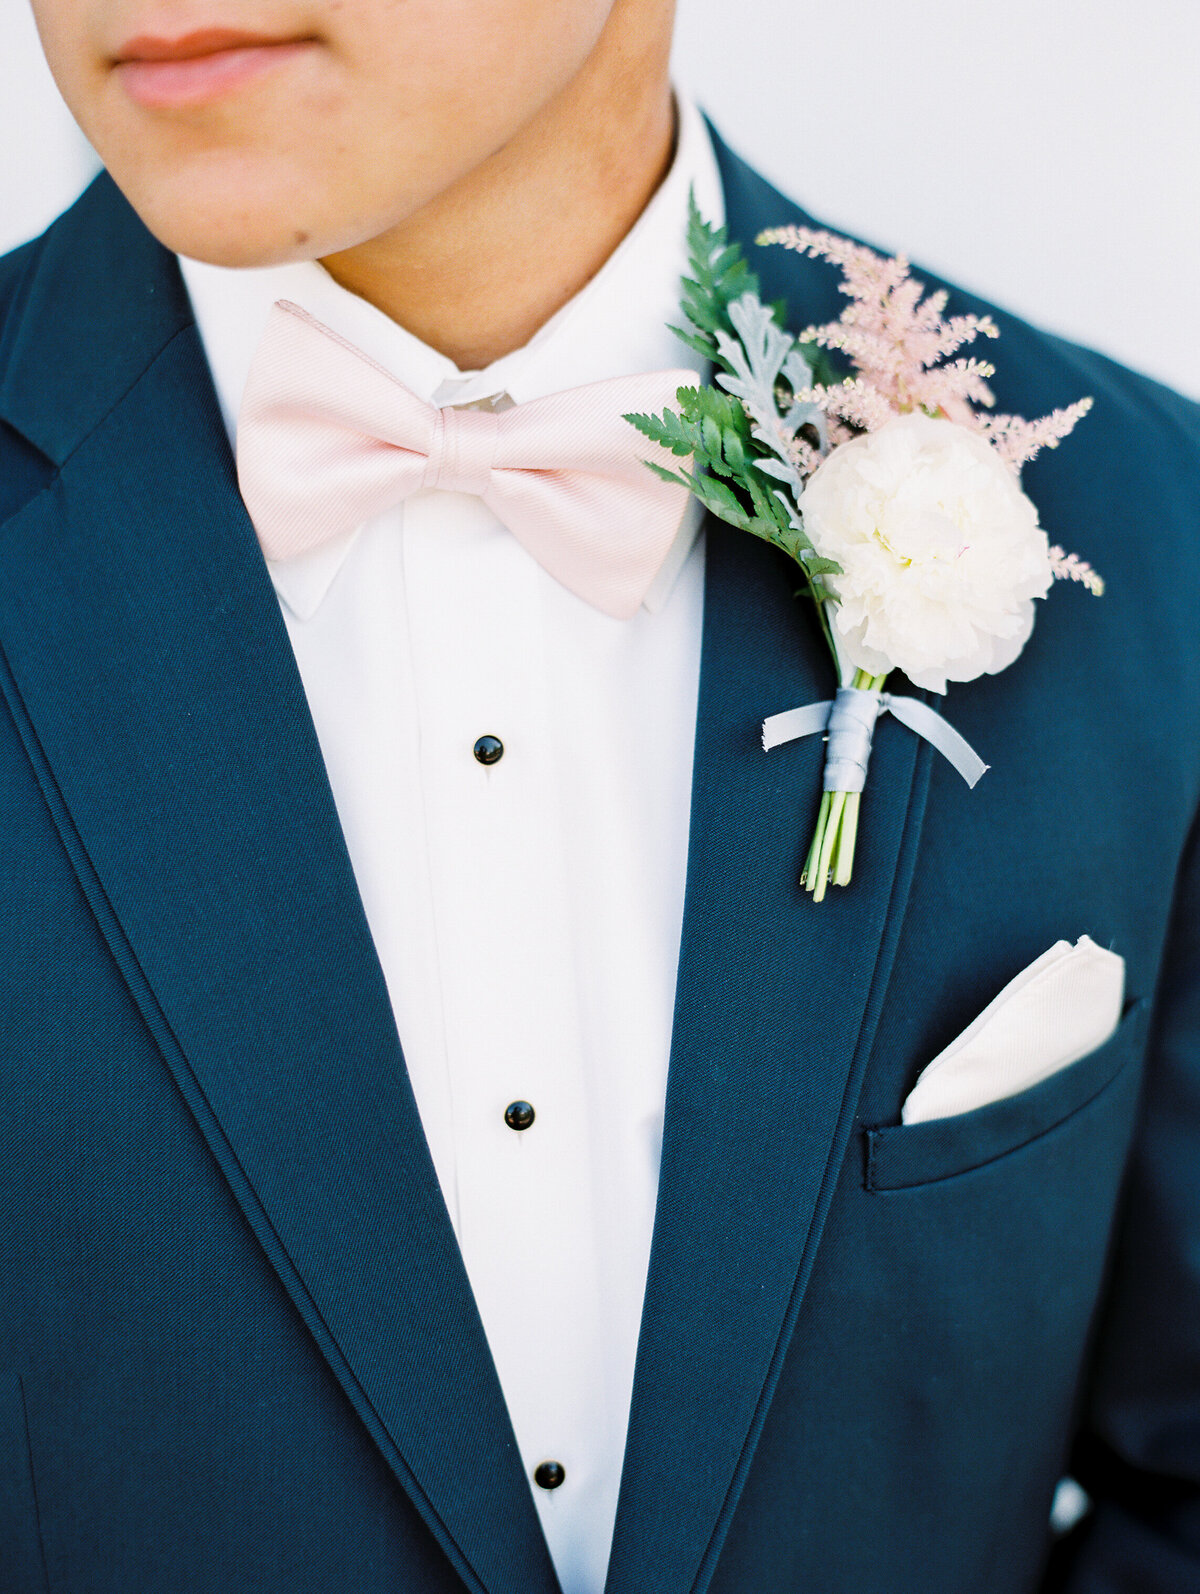 Close-up of groom's white, pink and green boutonniere and pink bowtie